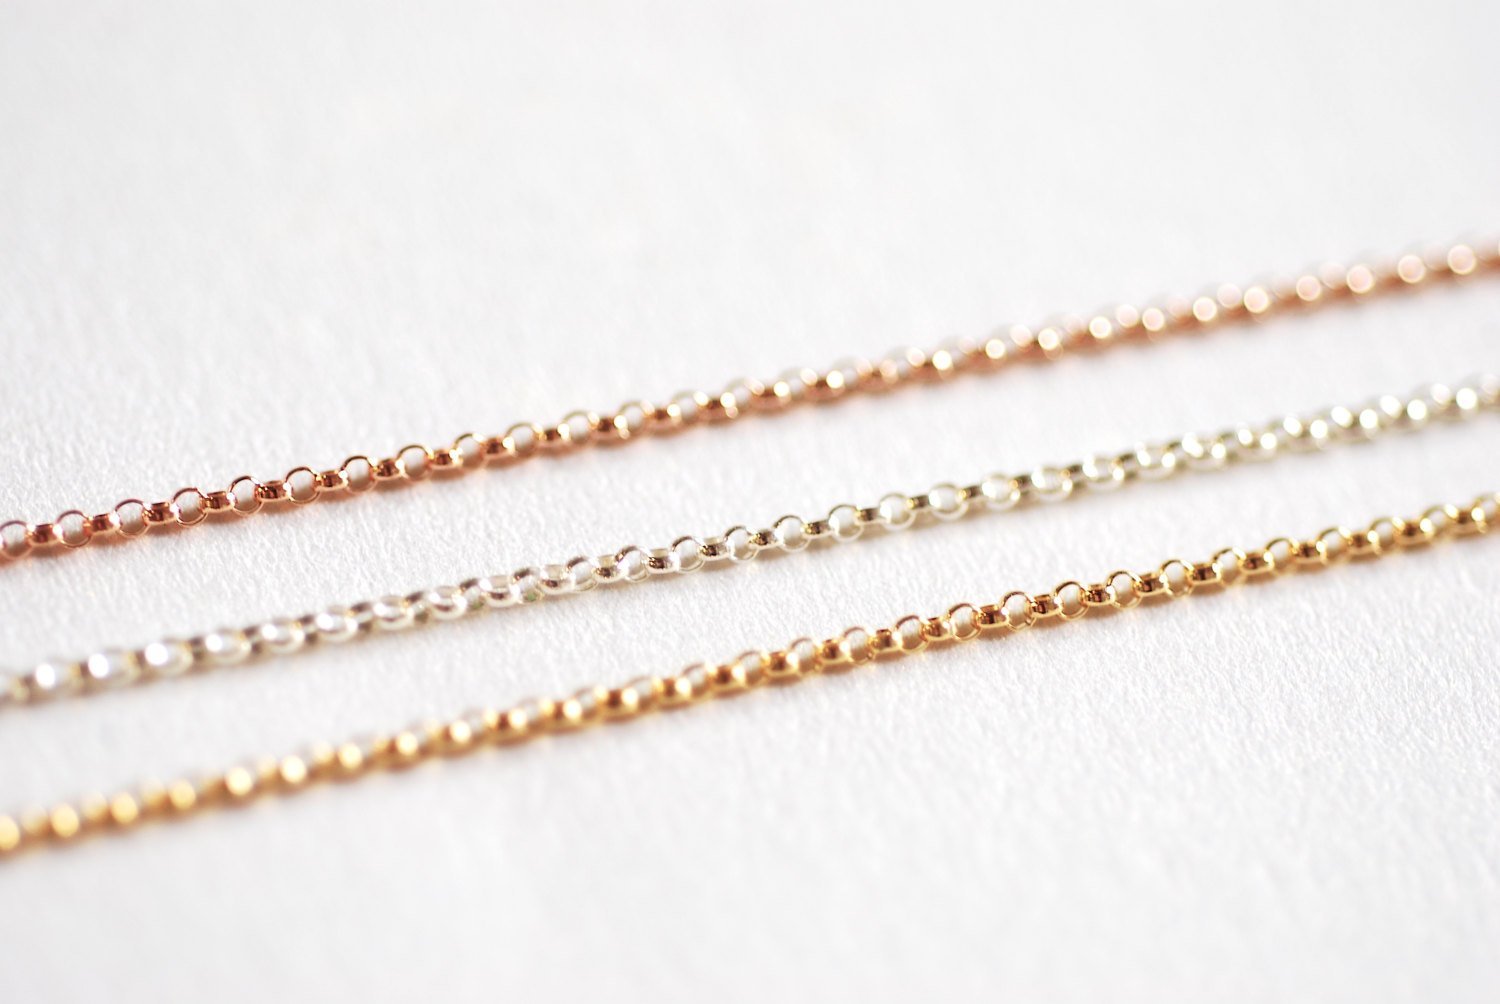 1.4mm Rolo Chain, Gold-Filled or Sterling Silver, Unfinished Rolo Chain by Foot Bulk Chain